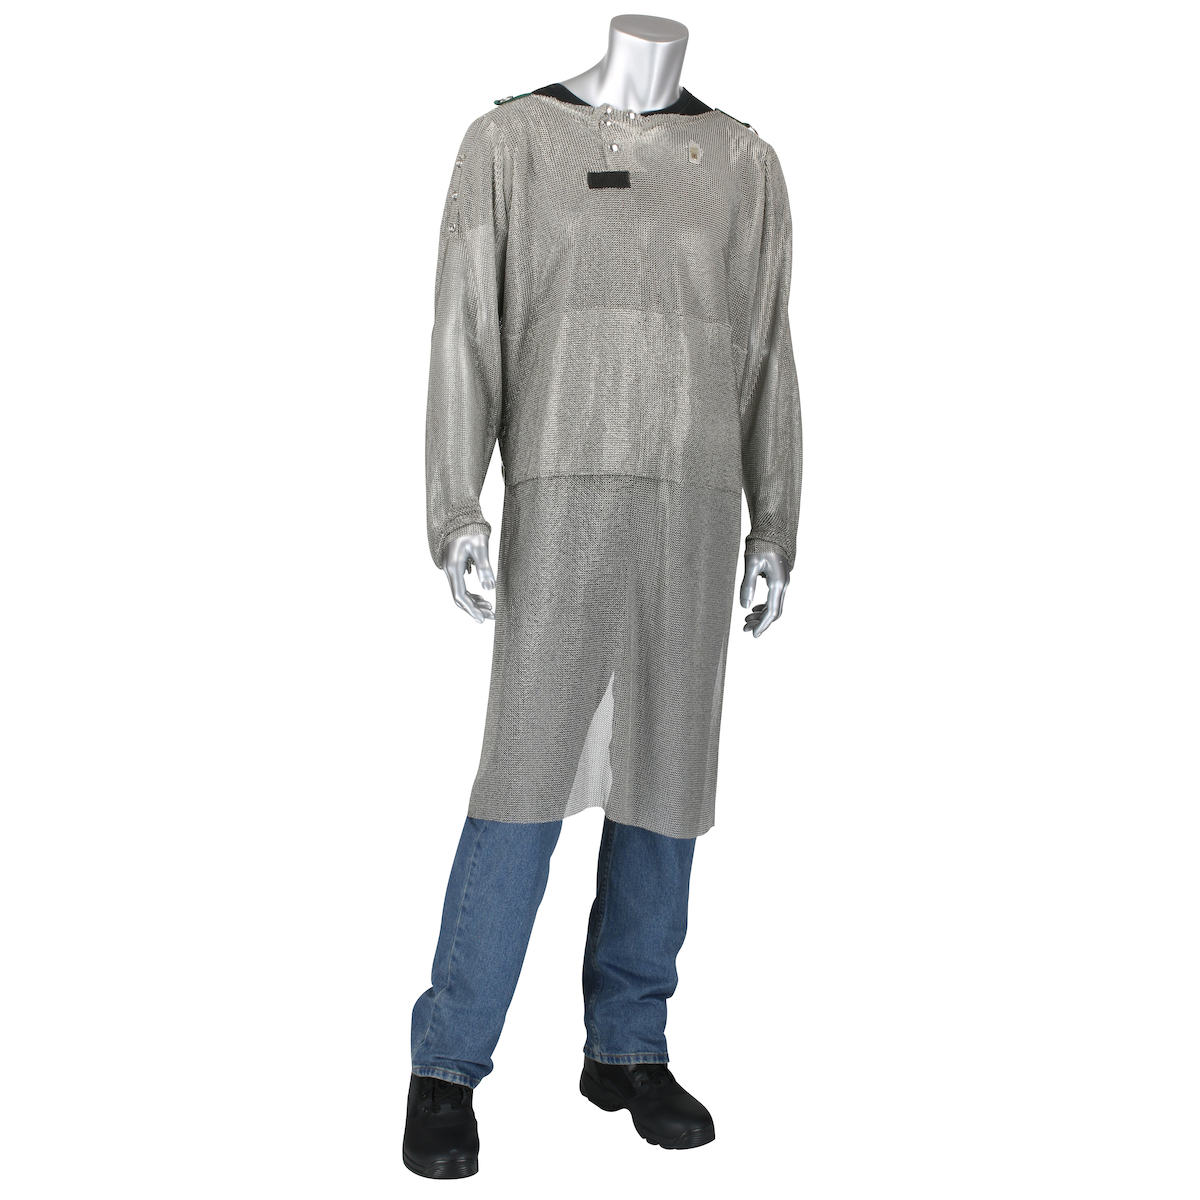 USM-4352L US Mesh® Full Body Stainless Steel Metal Mesh Tunic with Extended Apron Front and Belly Guard